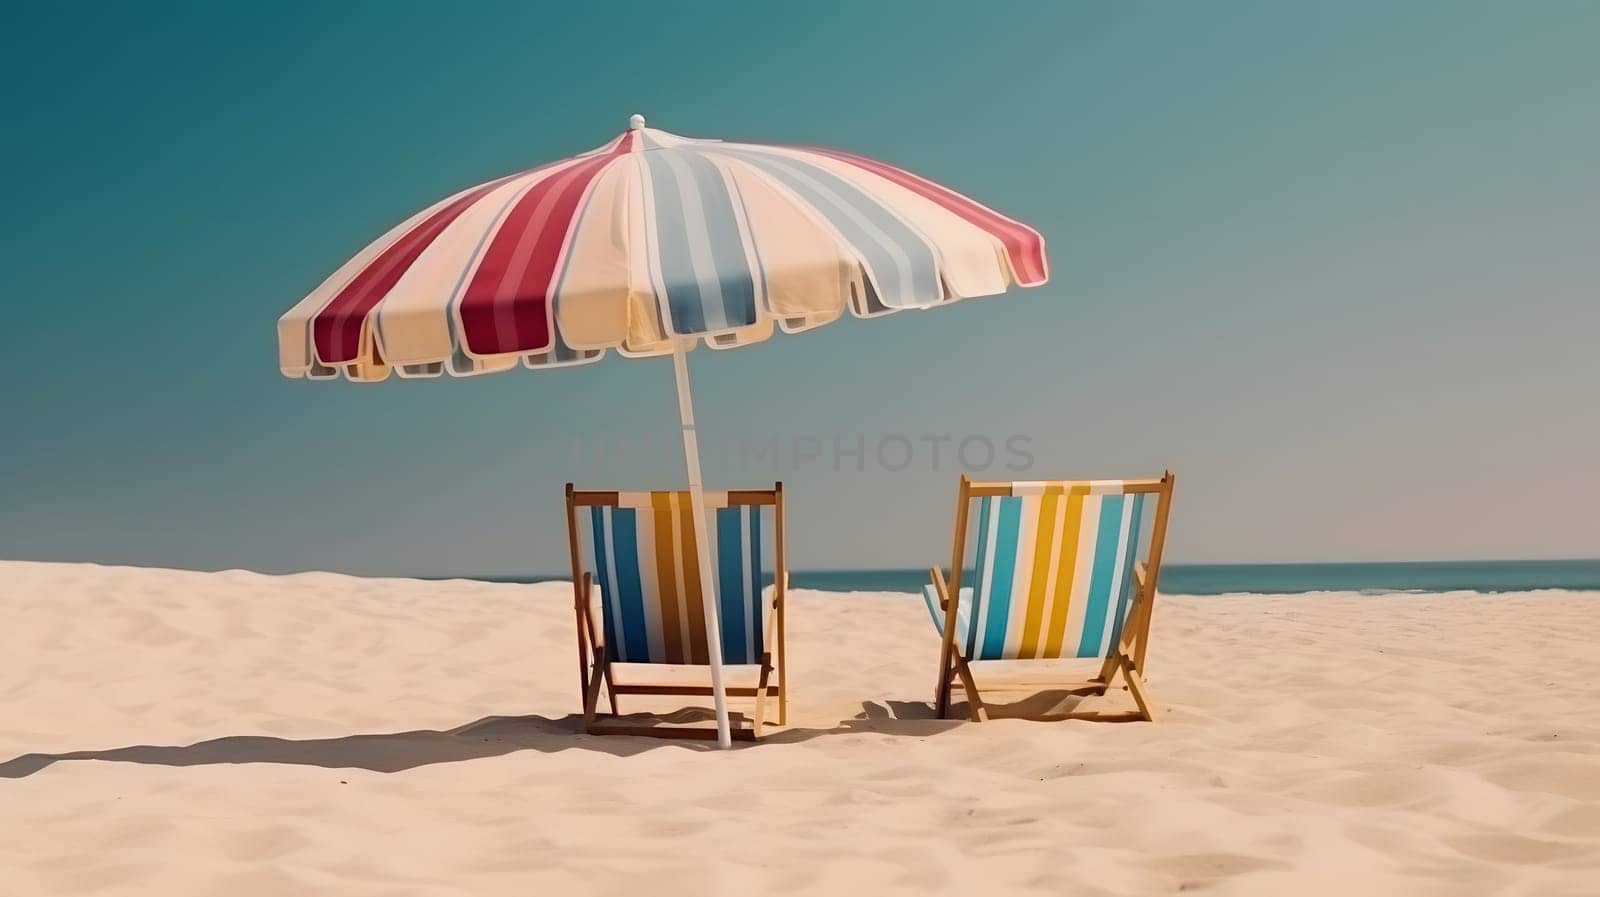 Beach umbrella with chairs on the sand beach, neural network generated art by z1b